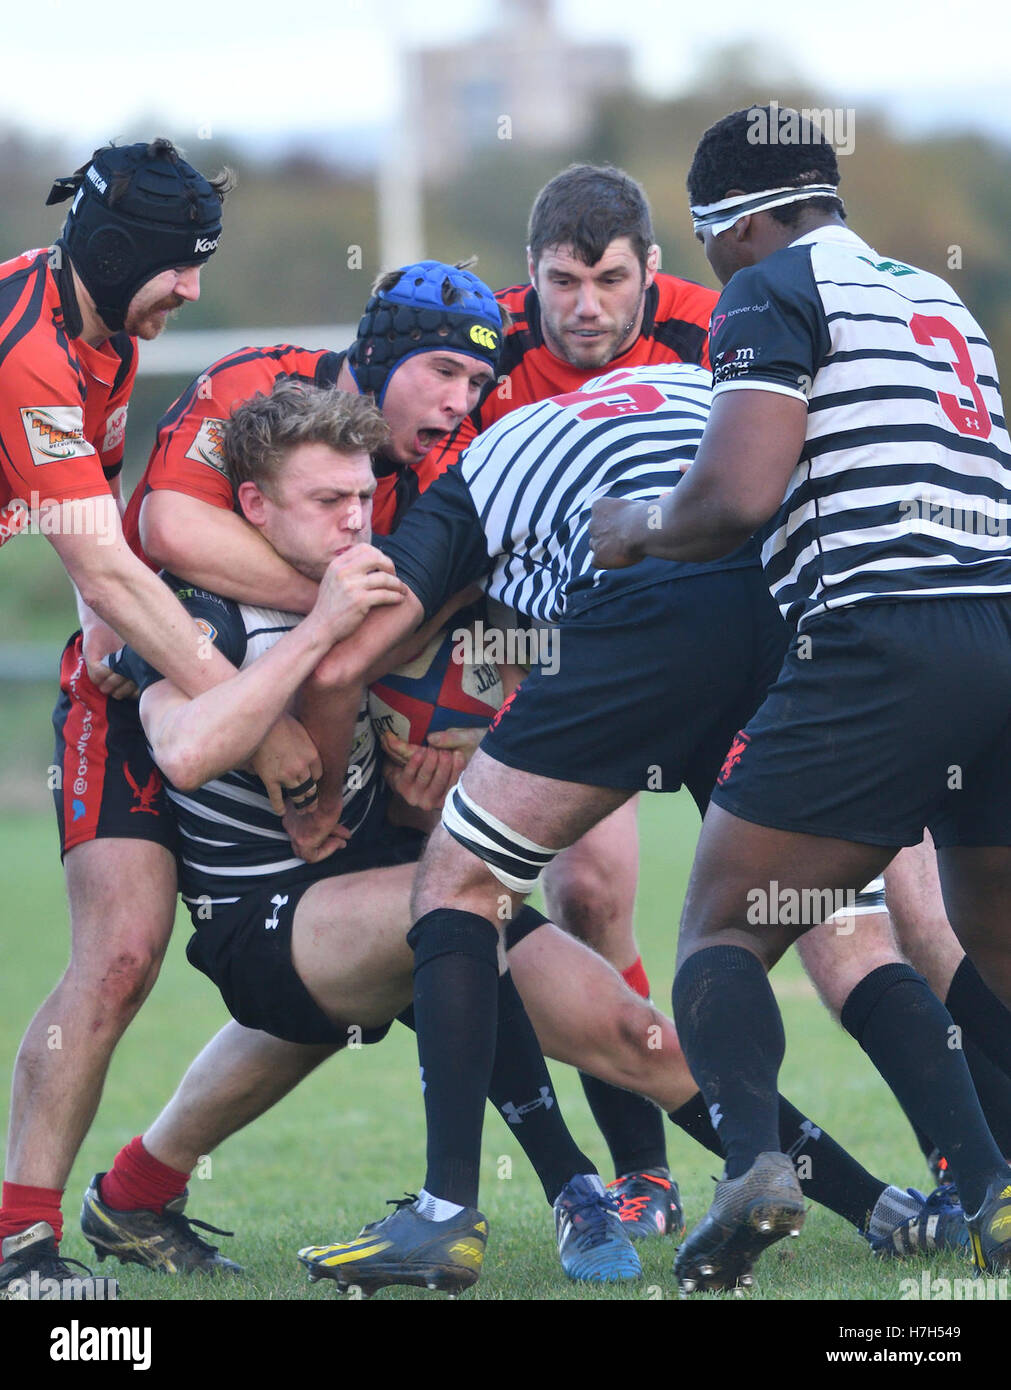 Manchester, UK. 5th Nov, 2016. Action from the South Lancashire/Cheshire Division 1 match between Broughton Park, in black, and Oswestrys, in red. Broughton Park win 62-0, after leading 22-0 at half-time to move into second place and keep Oswestry in bottom place. Credit:  John Fryer/Alamy Live News Stock Photo